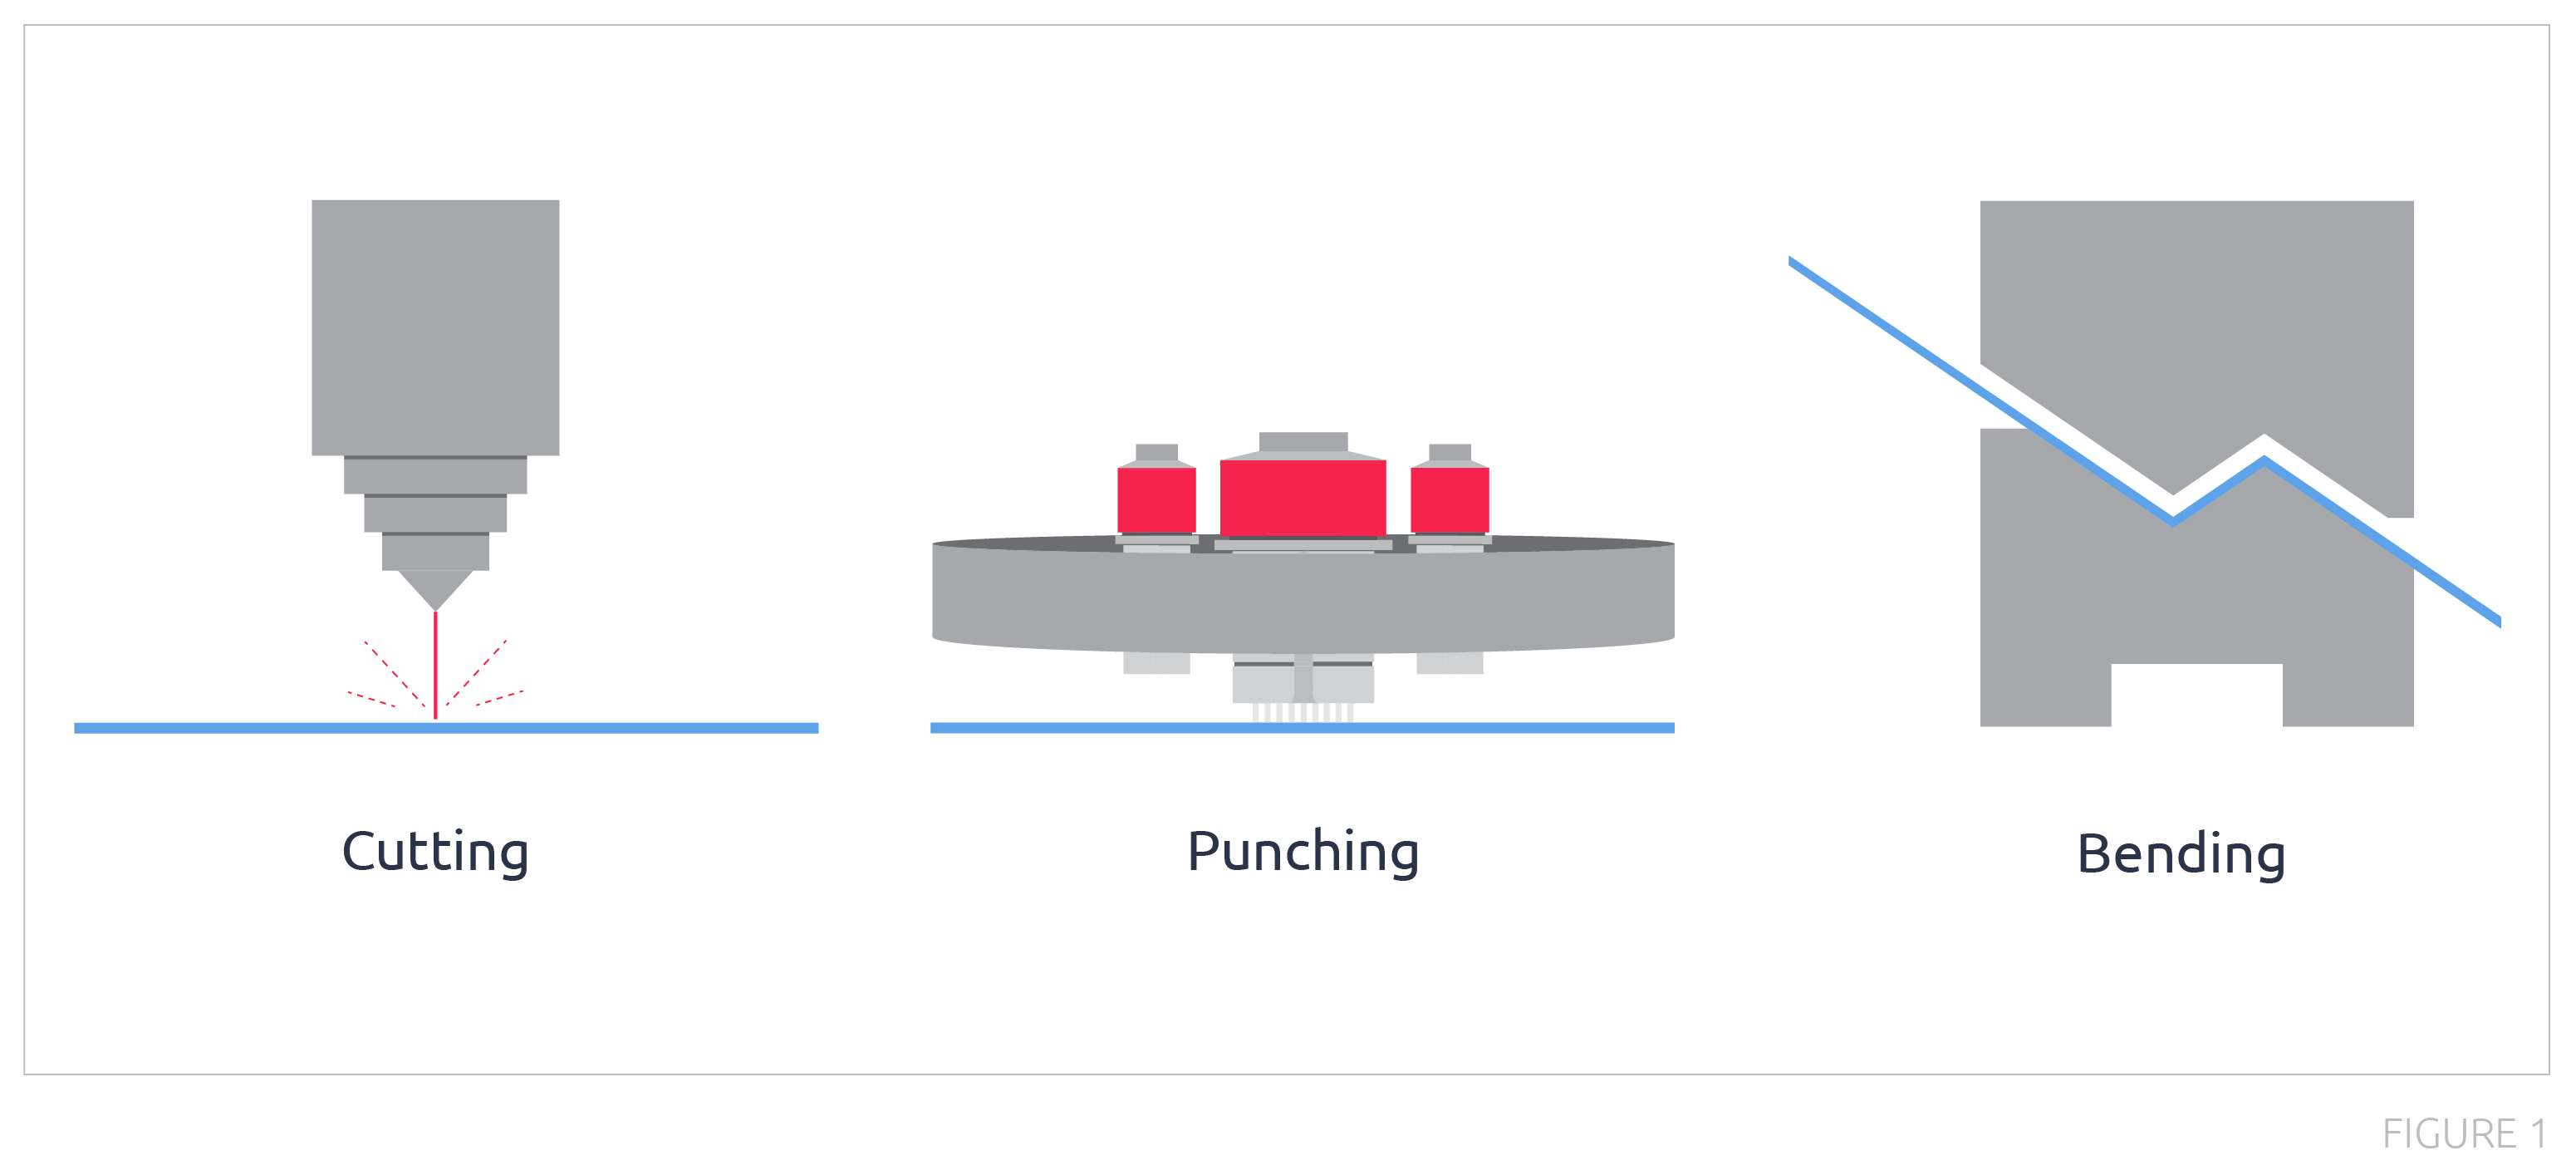 Illustration showing cutting, punching, and bending processes for sheet metal